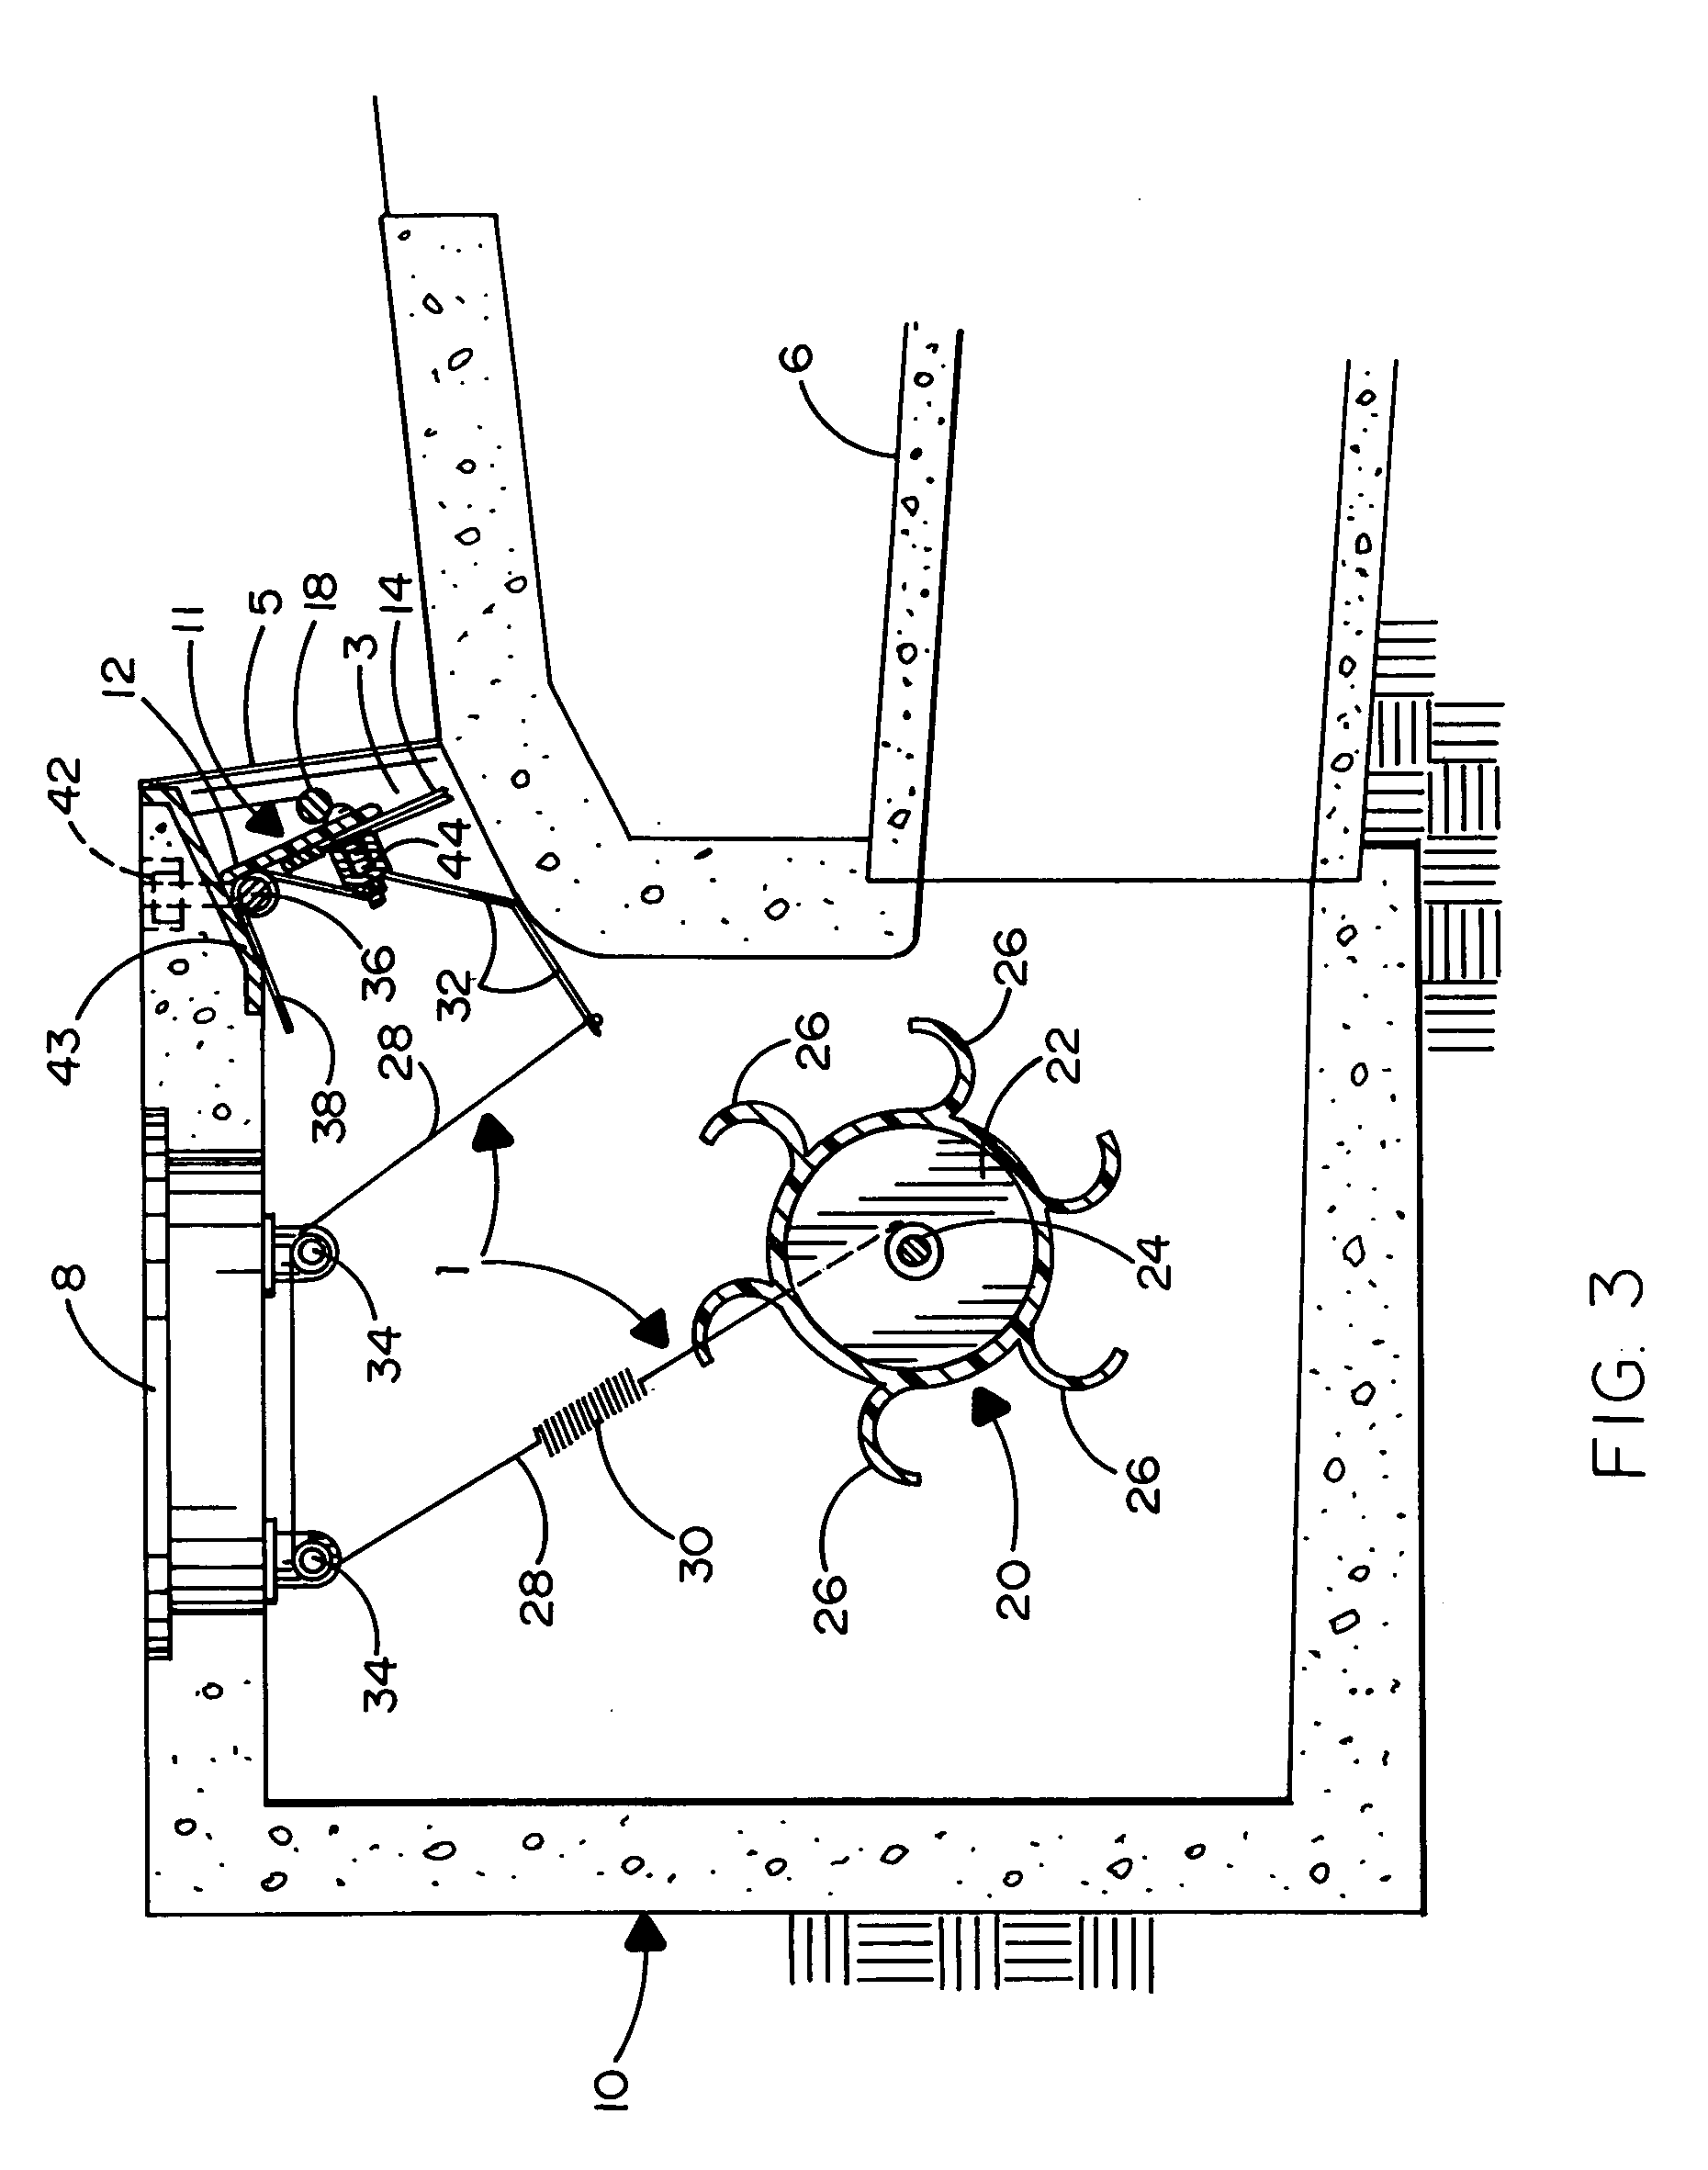 Pivotal gate for a catch basin of a storm drain system